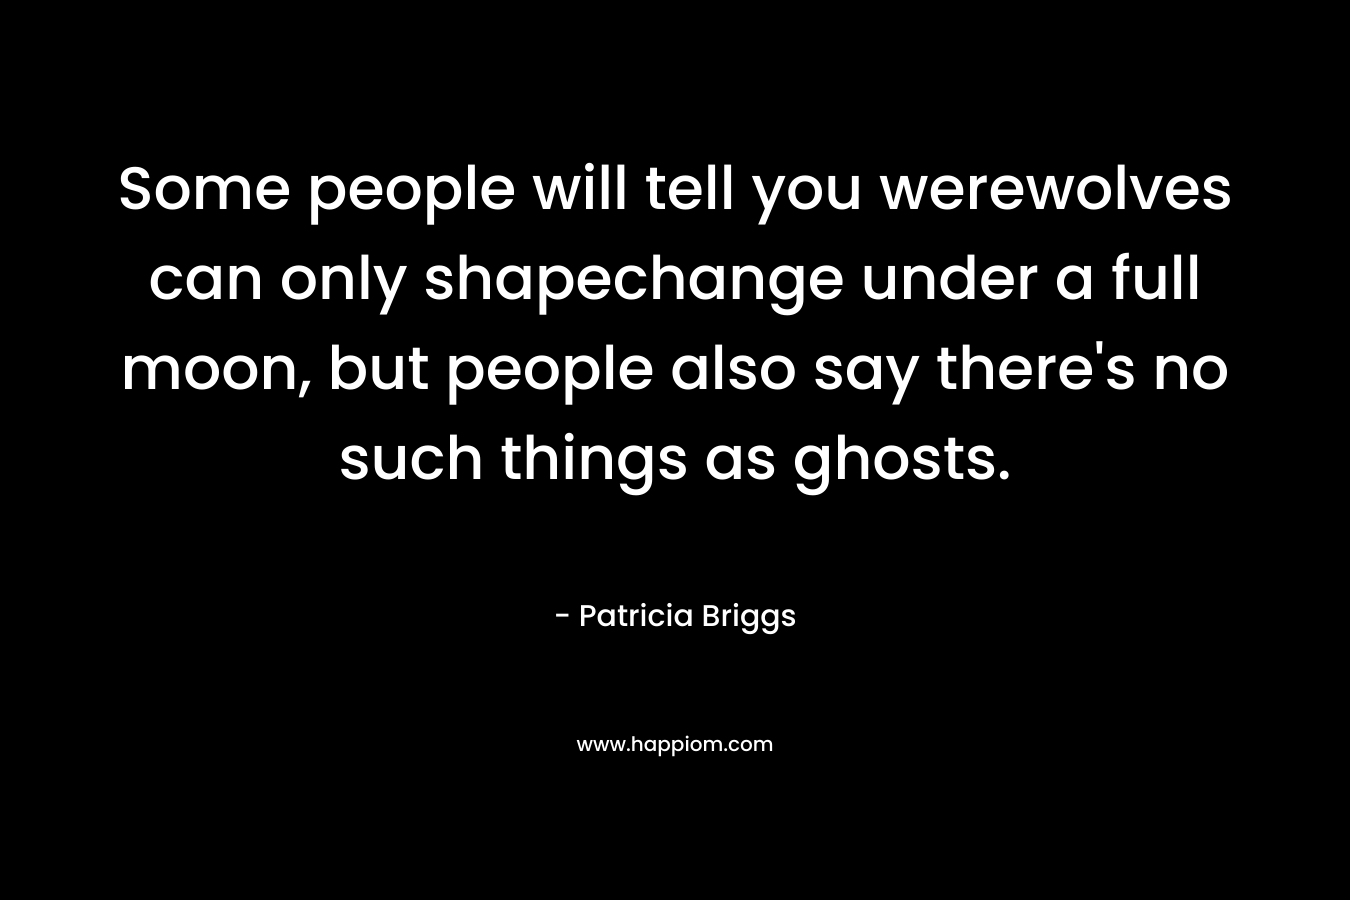 Some people will tell you werewolves can only shapechange under a full moon, but people also say there's no such things as ghosts.